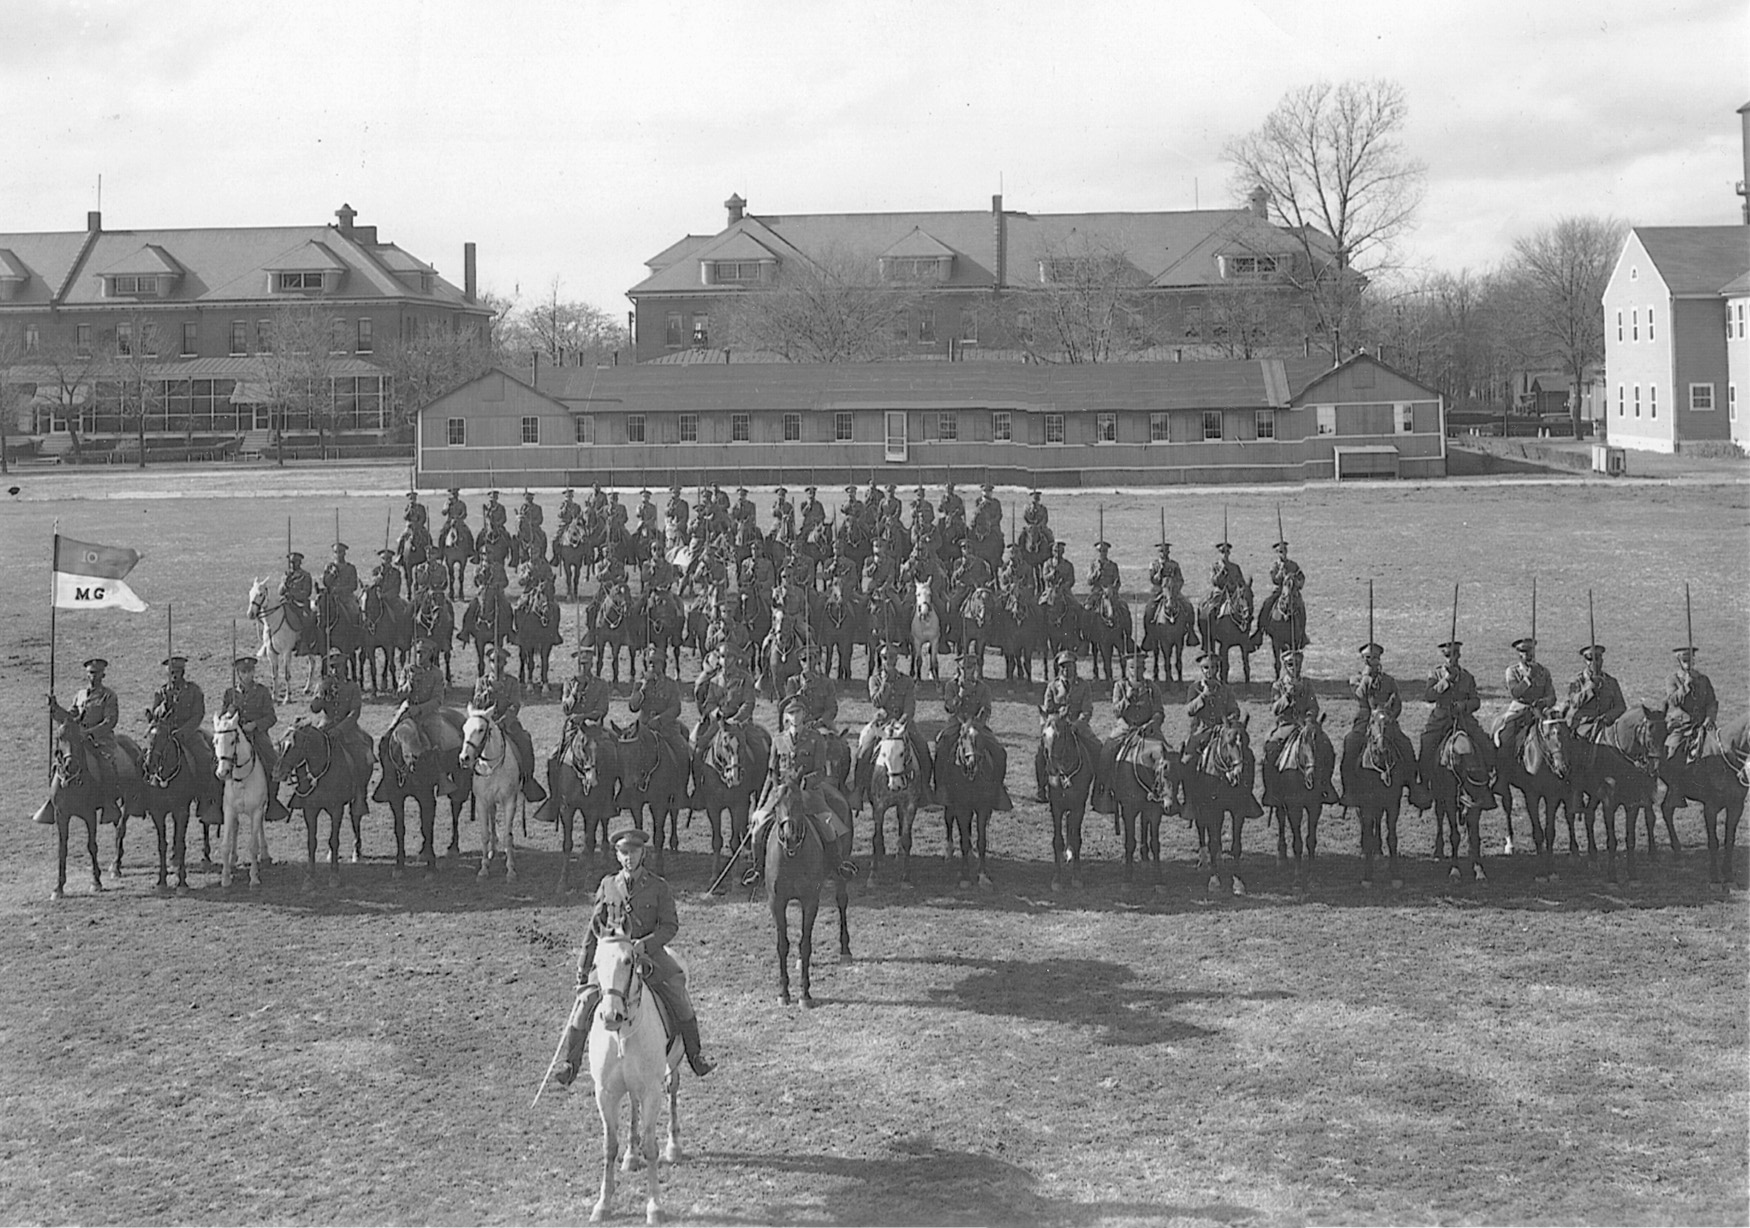 The U.S. Army’s 10th Cavalry parades at Fort Myer, Va., in 1931.